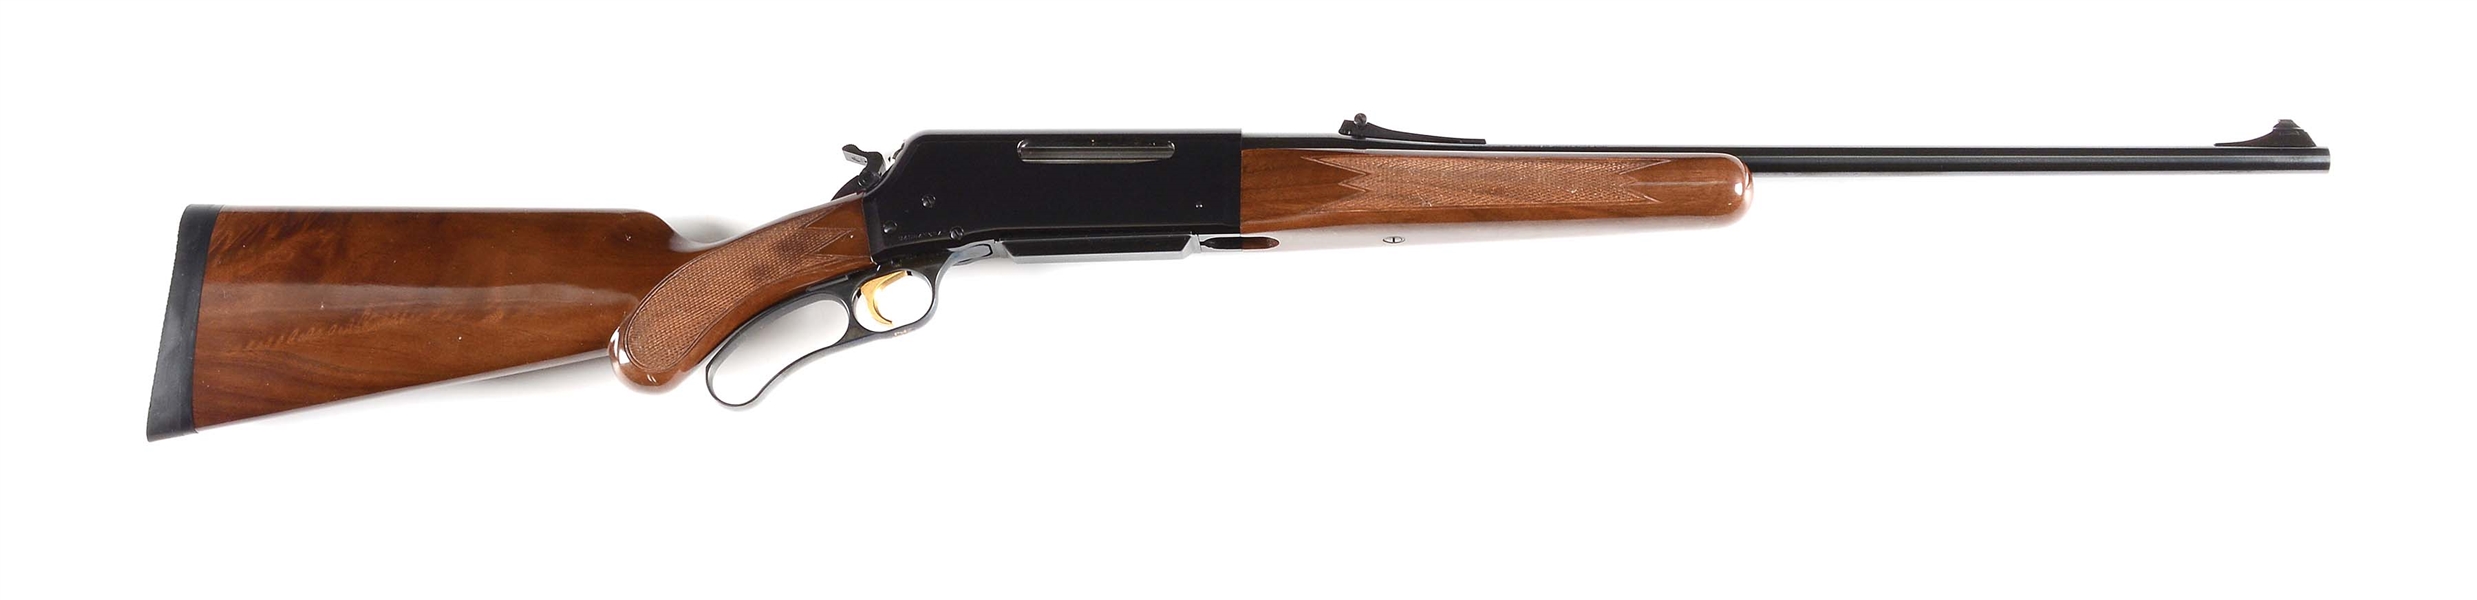 (M) BROWNING BLR LEVER ACTION RIFLE.